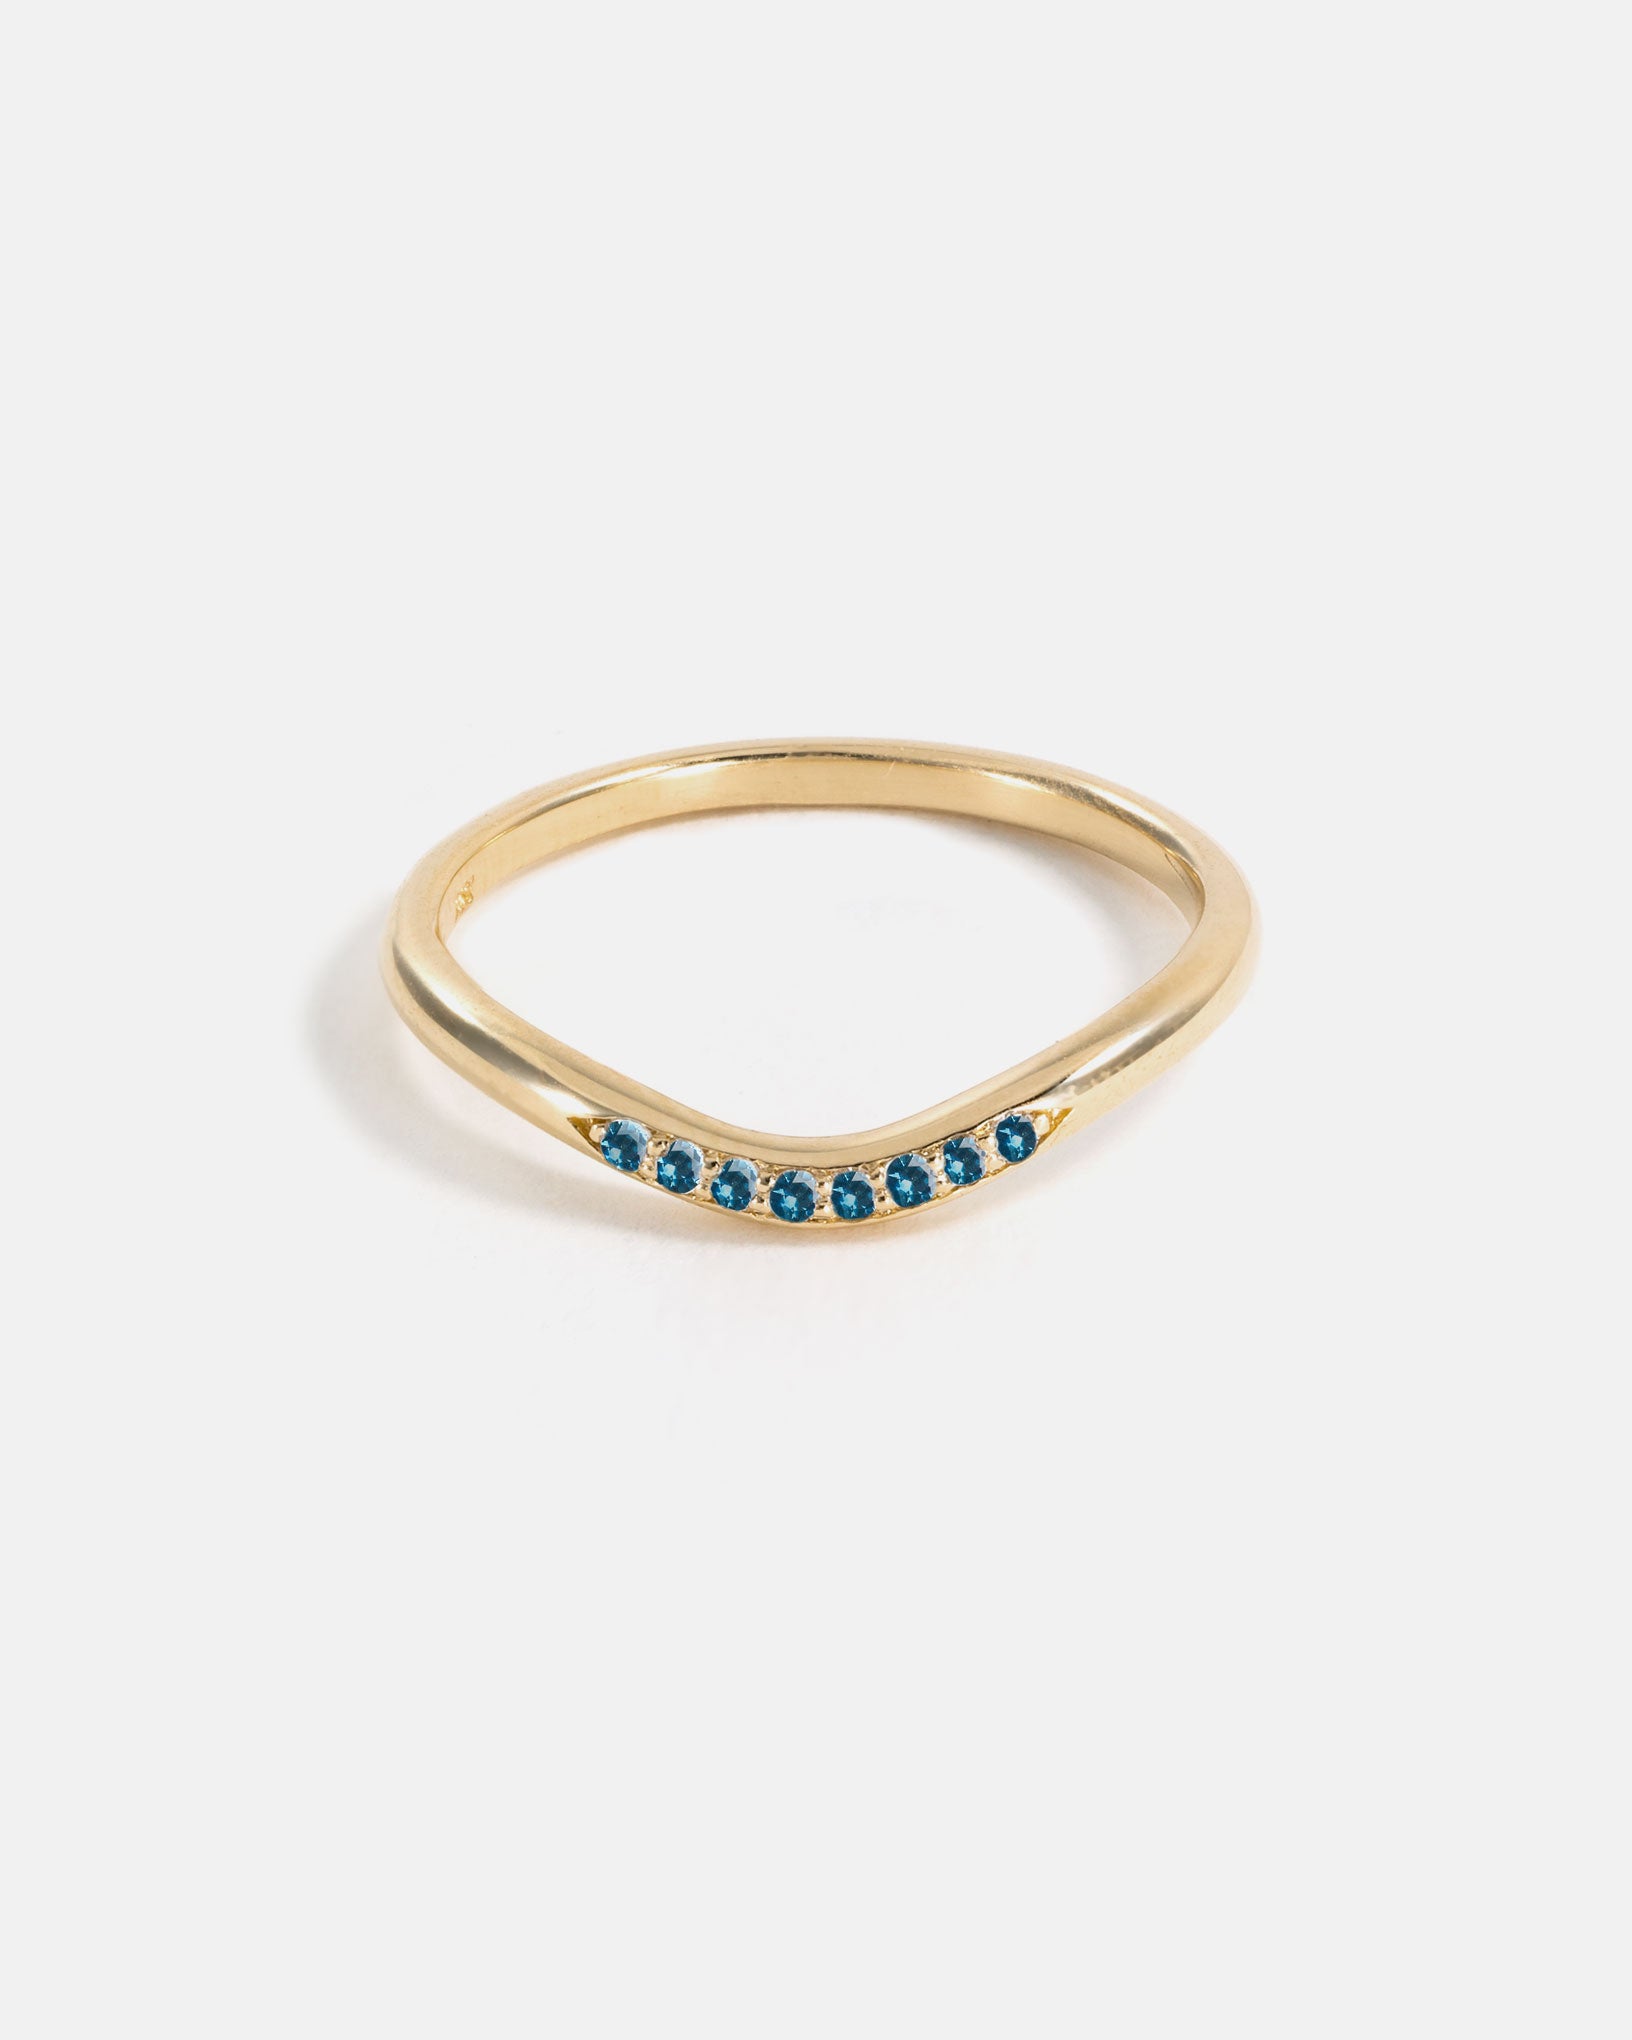 Stratura Wave Wedding Ring in 14k Yellow Gold with Ethical Birthstones